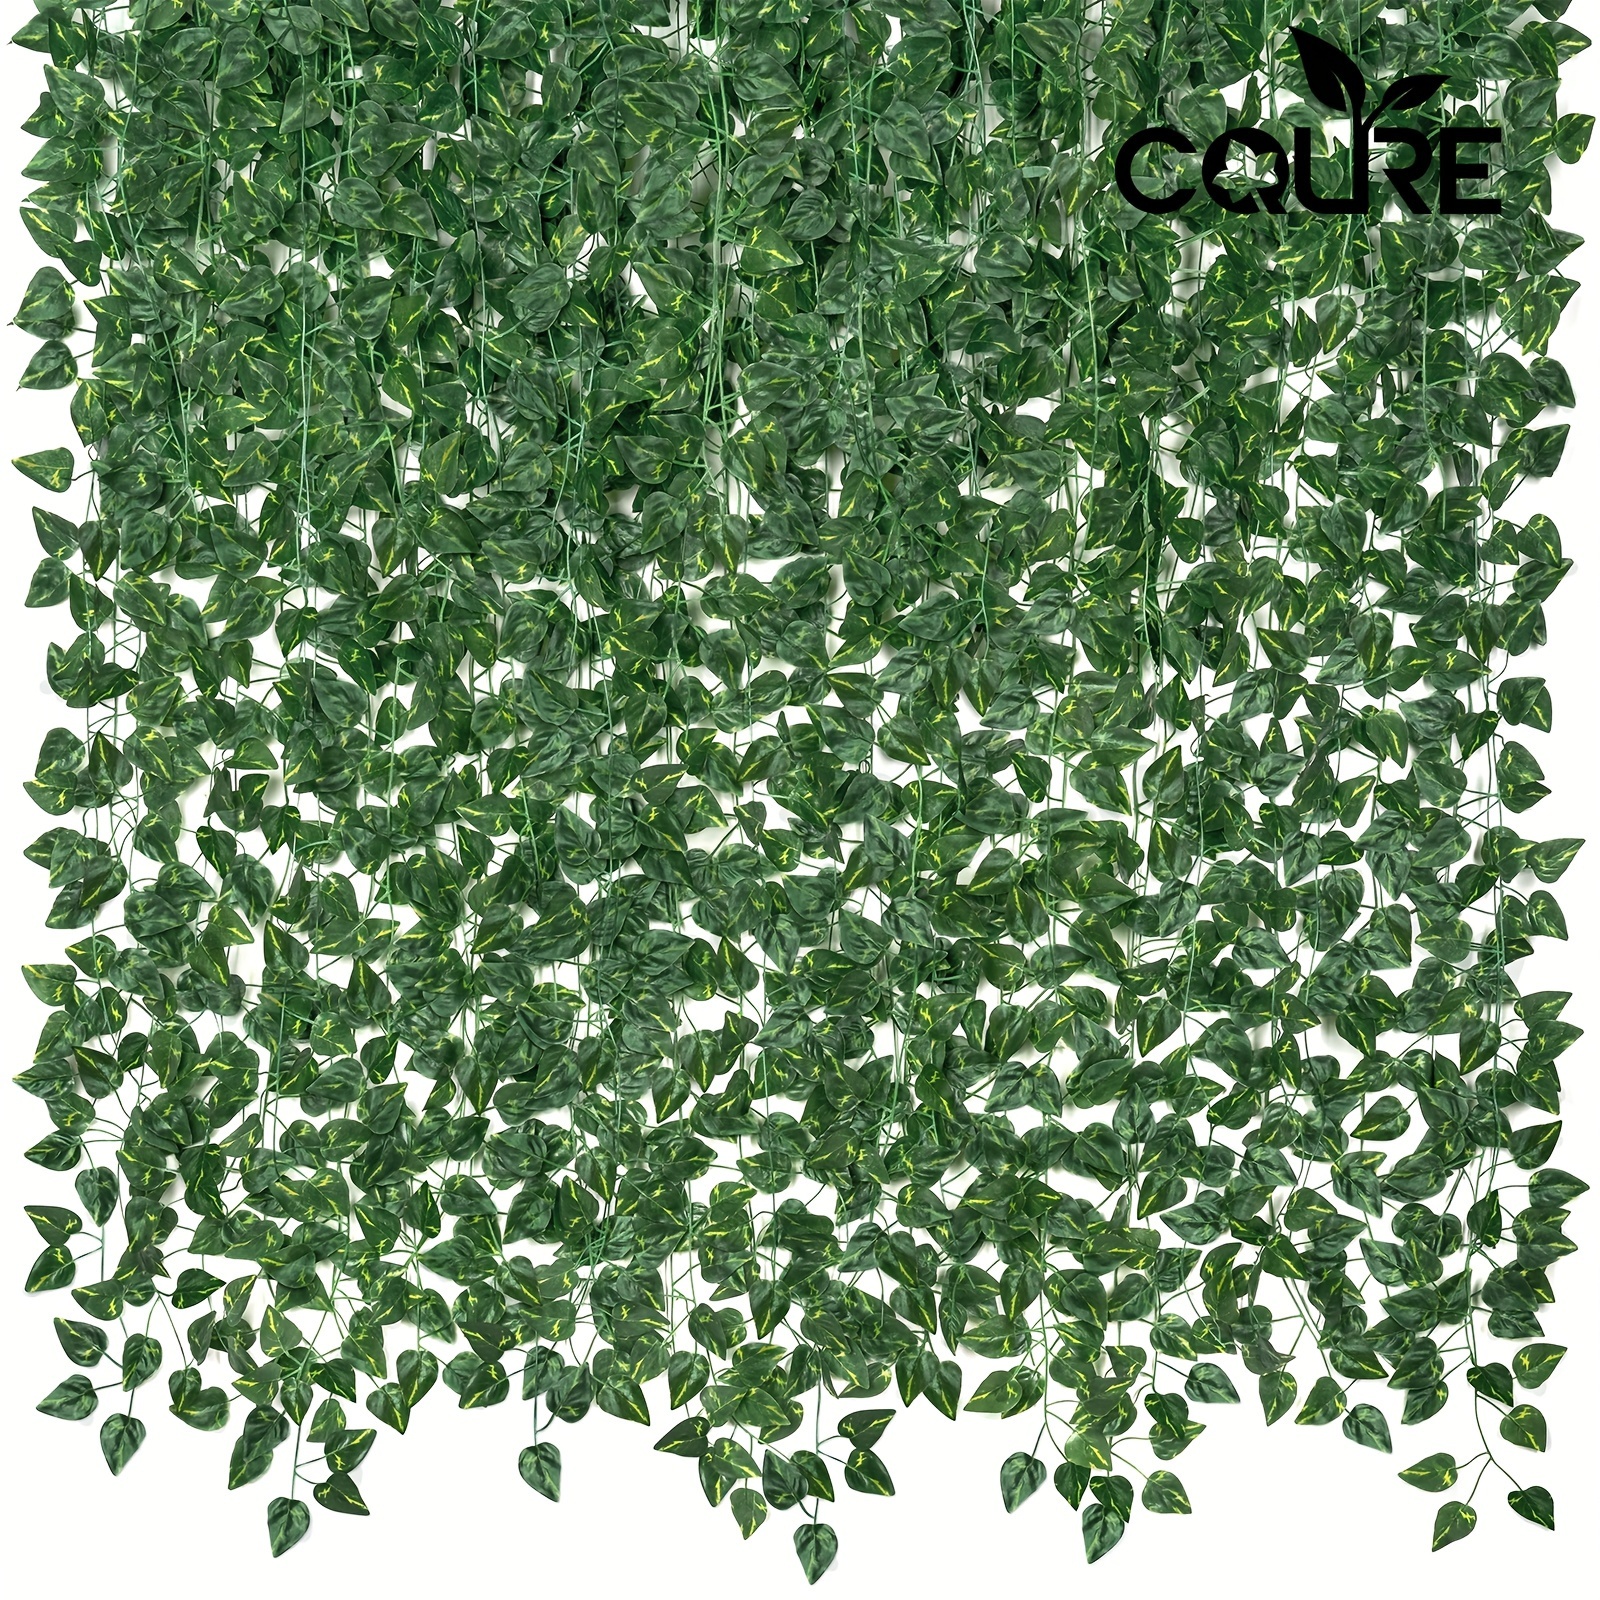 

Cqure 48 Pack 336ft Artificial Ivy Garland, Fake Vines Uv Resistant Greenery Leaves Fake Plants Hanging Aesthetic Vines For Home Bedroom Party Garden Wall Decor(green)